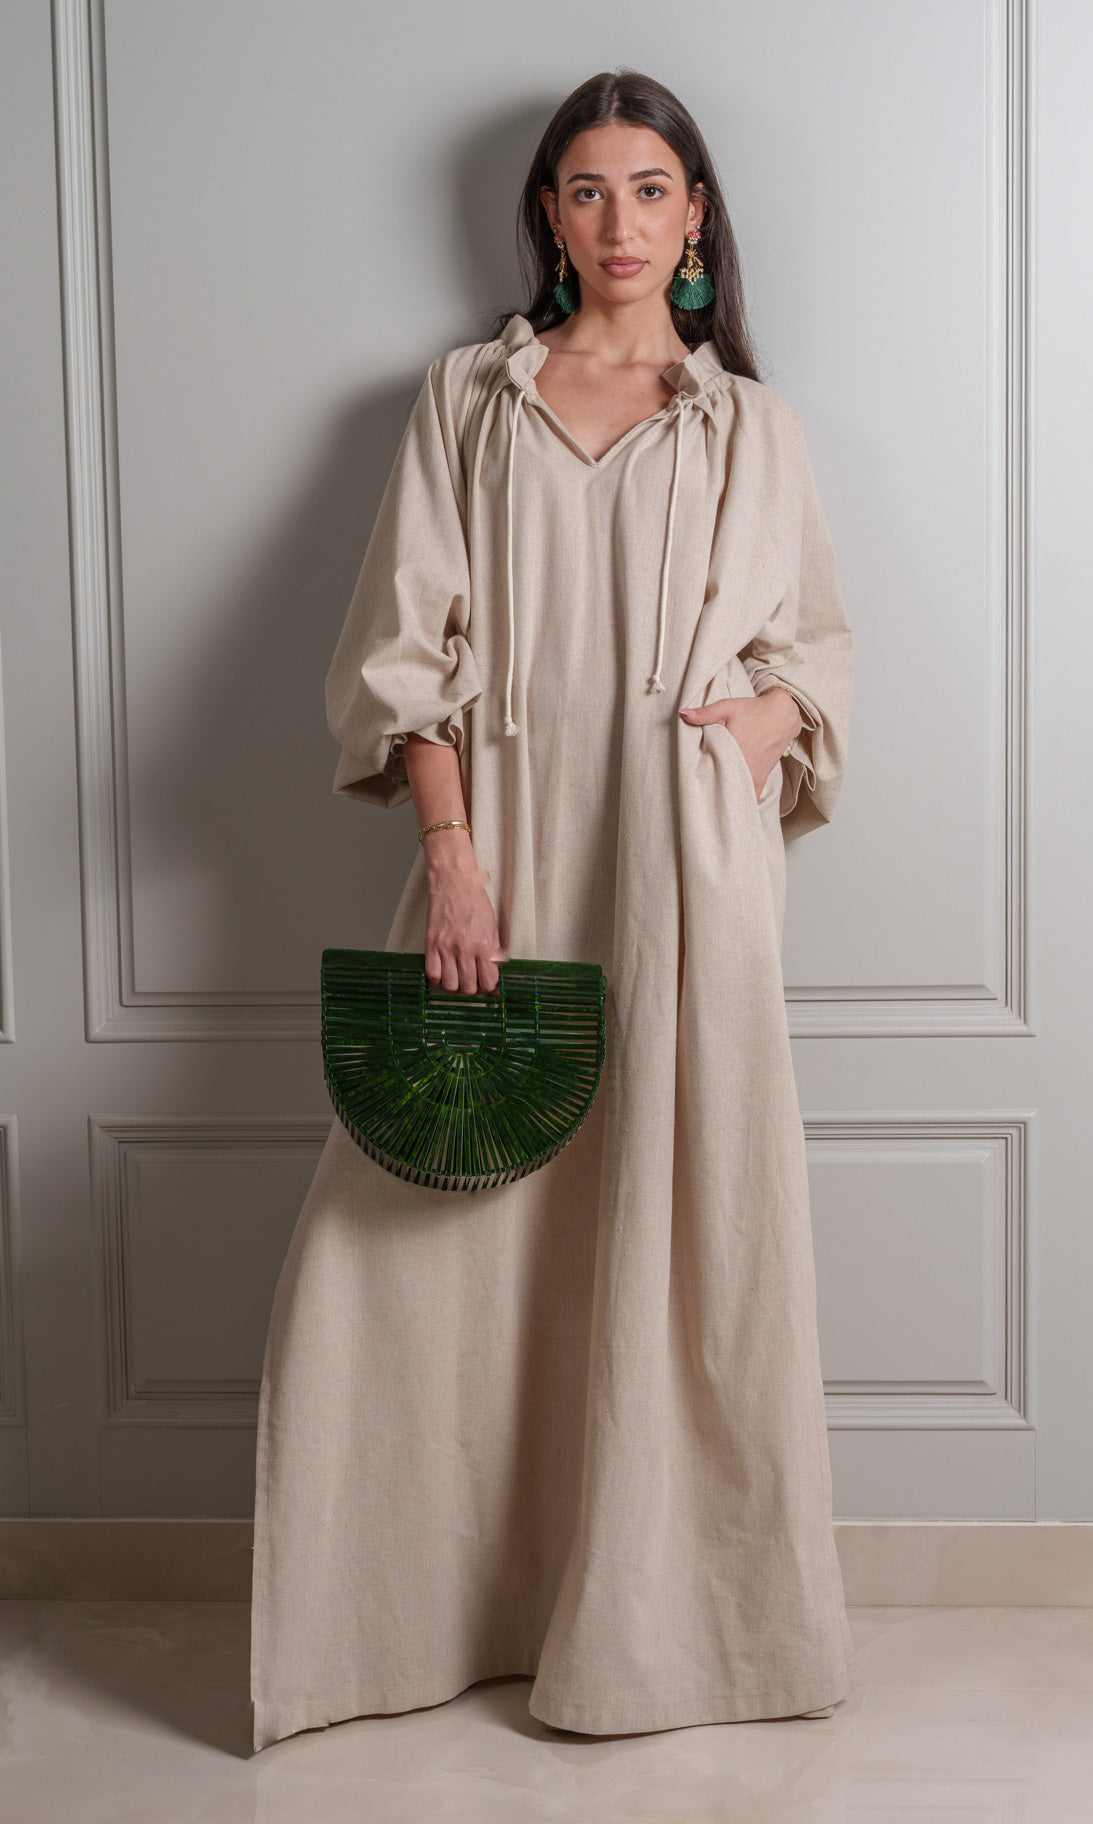 Model wears robe made of breathable linen fabric in a versatile neutral beige hue